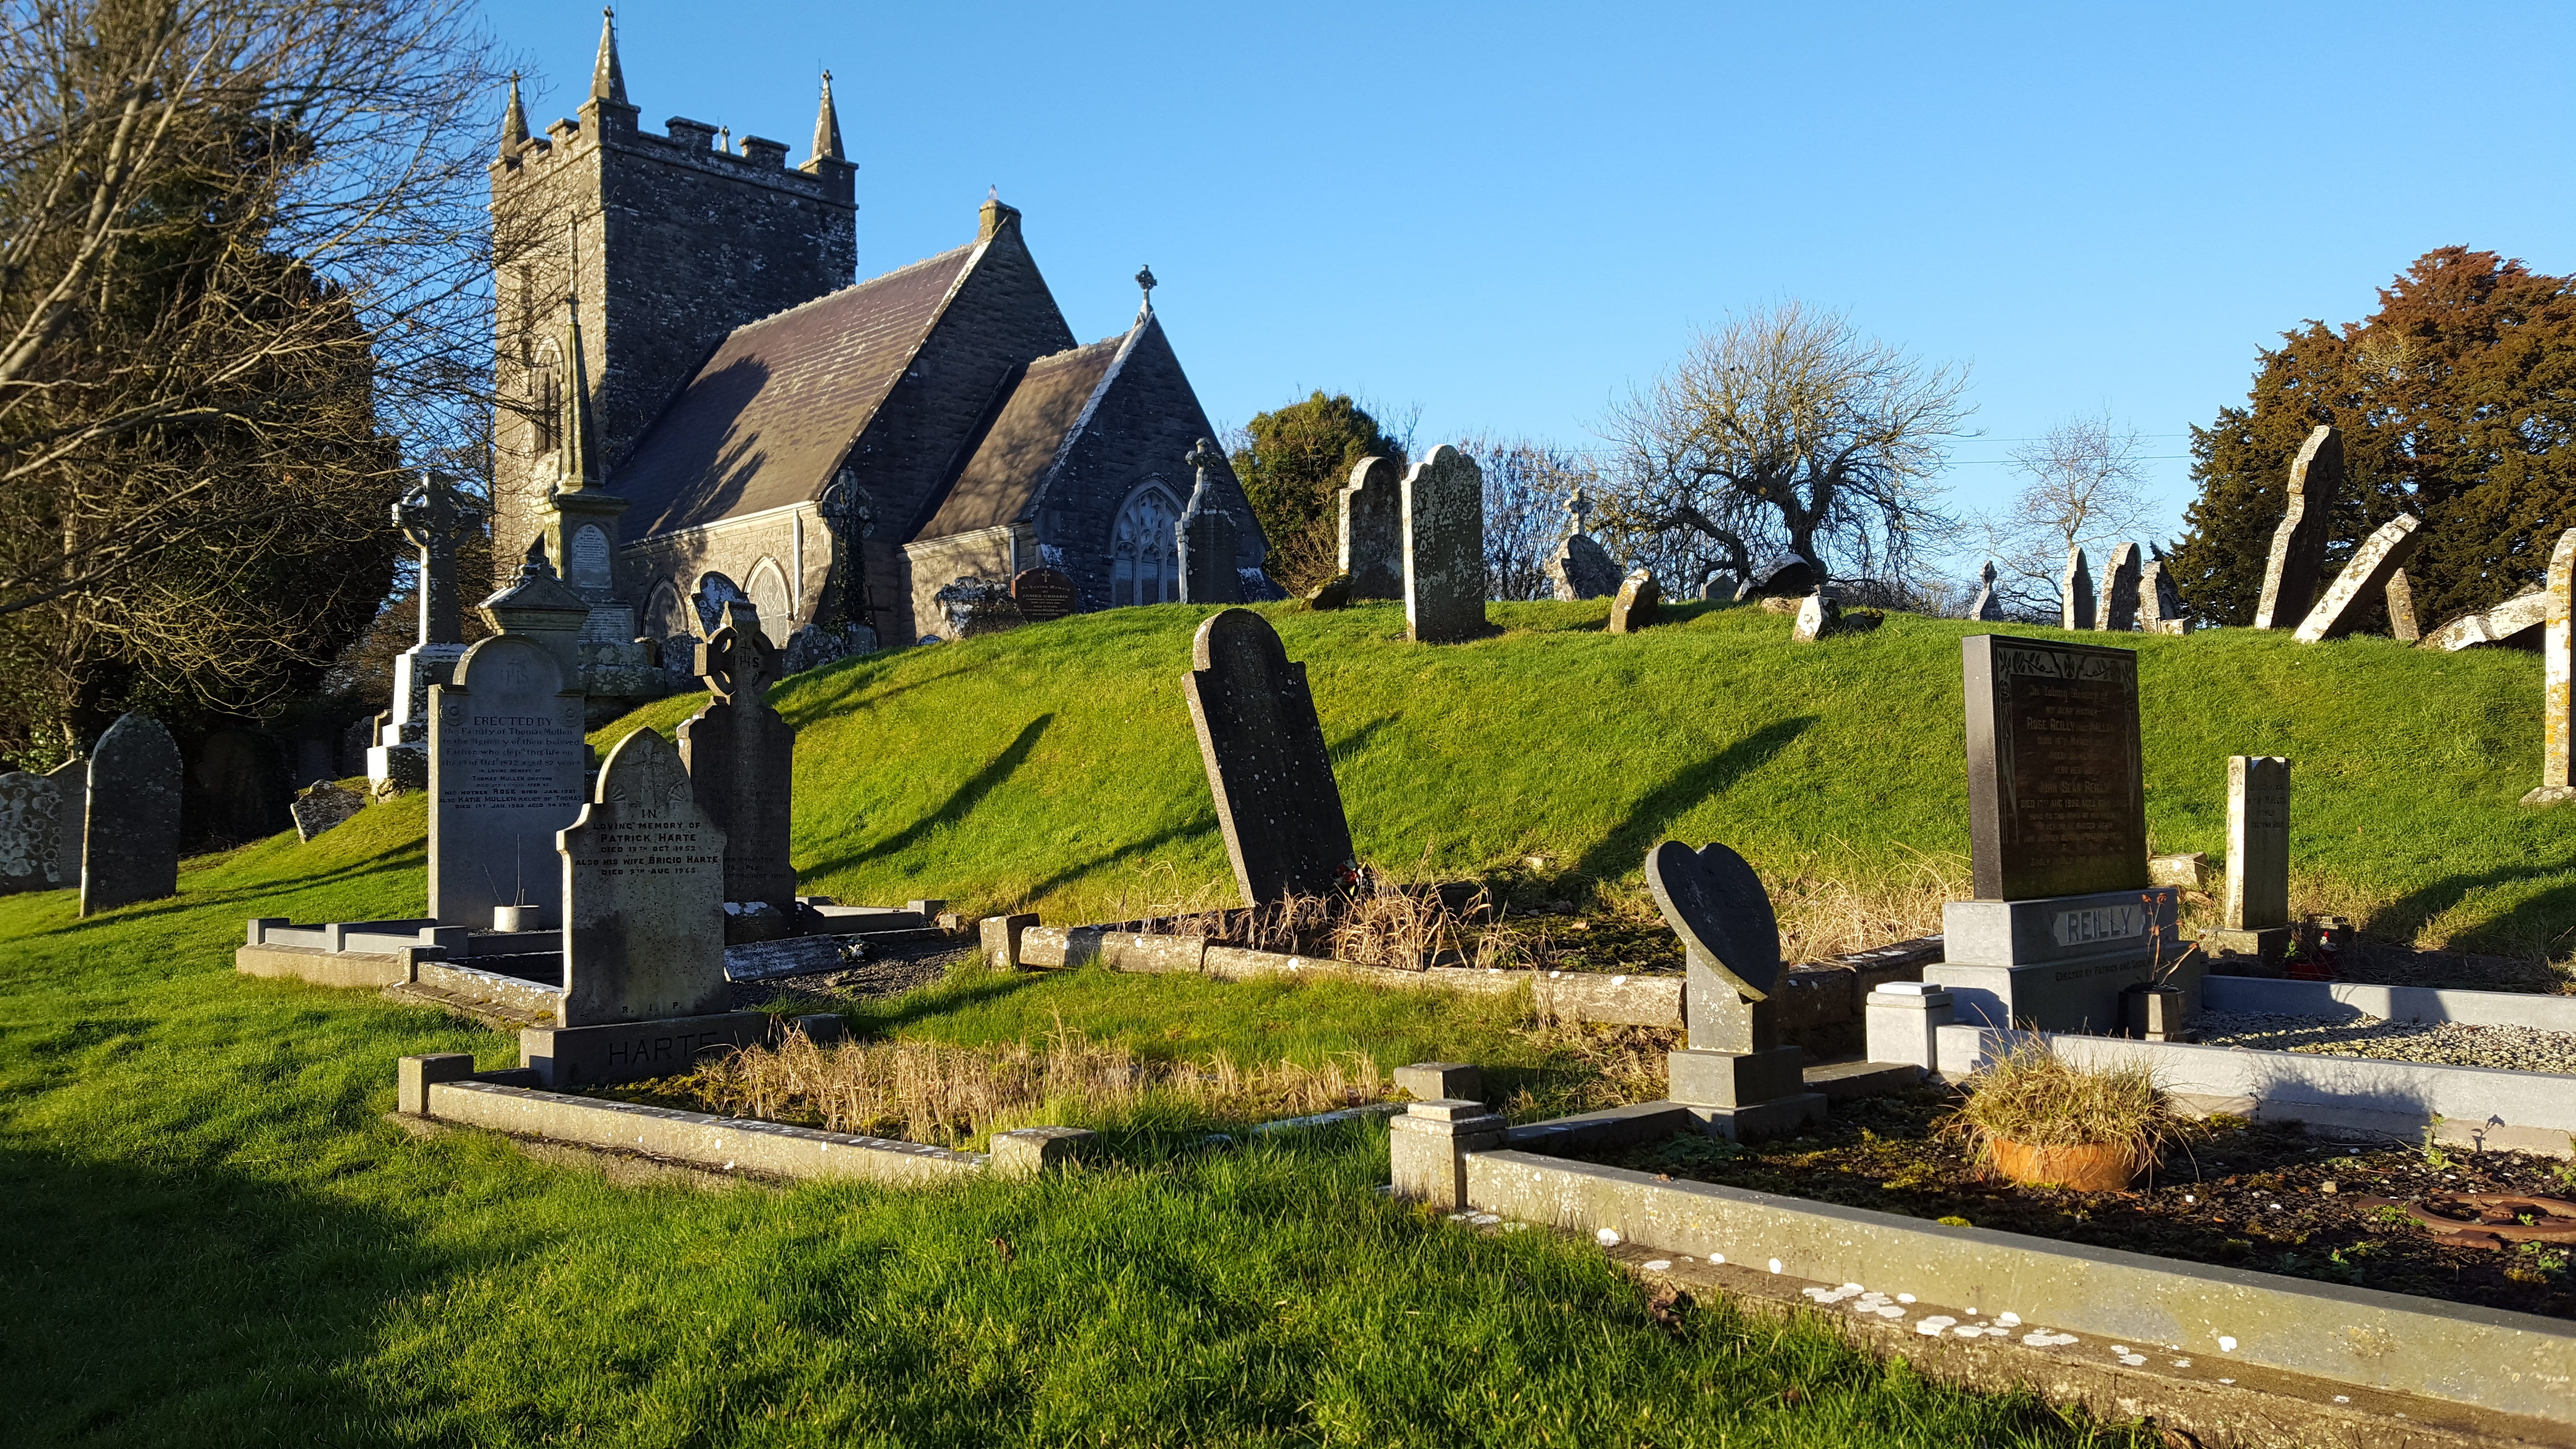 The graveyard at the church of St Patrick, with headstones leaning at crazy angles, clearly shows that the church is located upon a raised area, possibly from a previous structure.